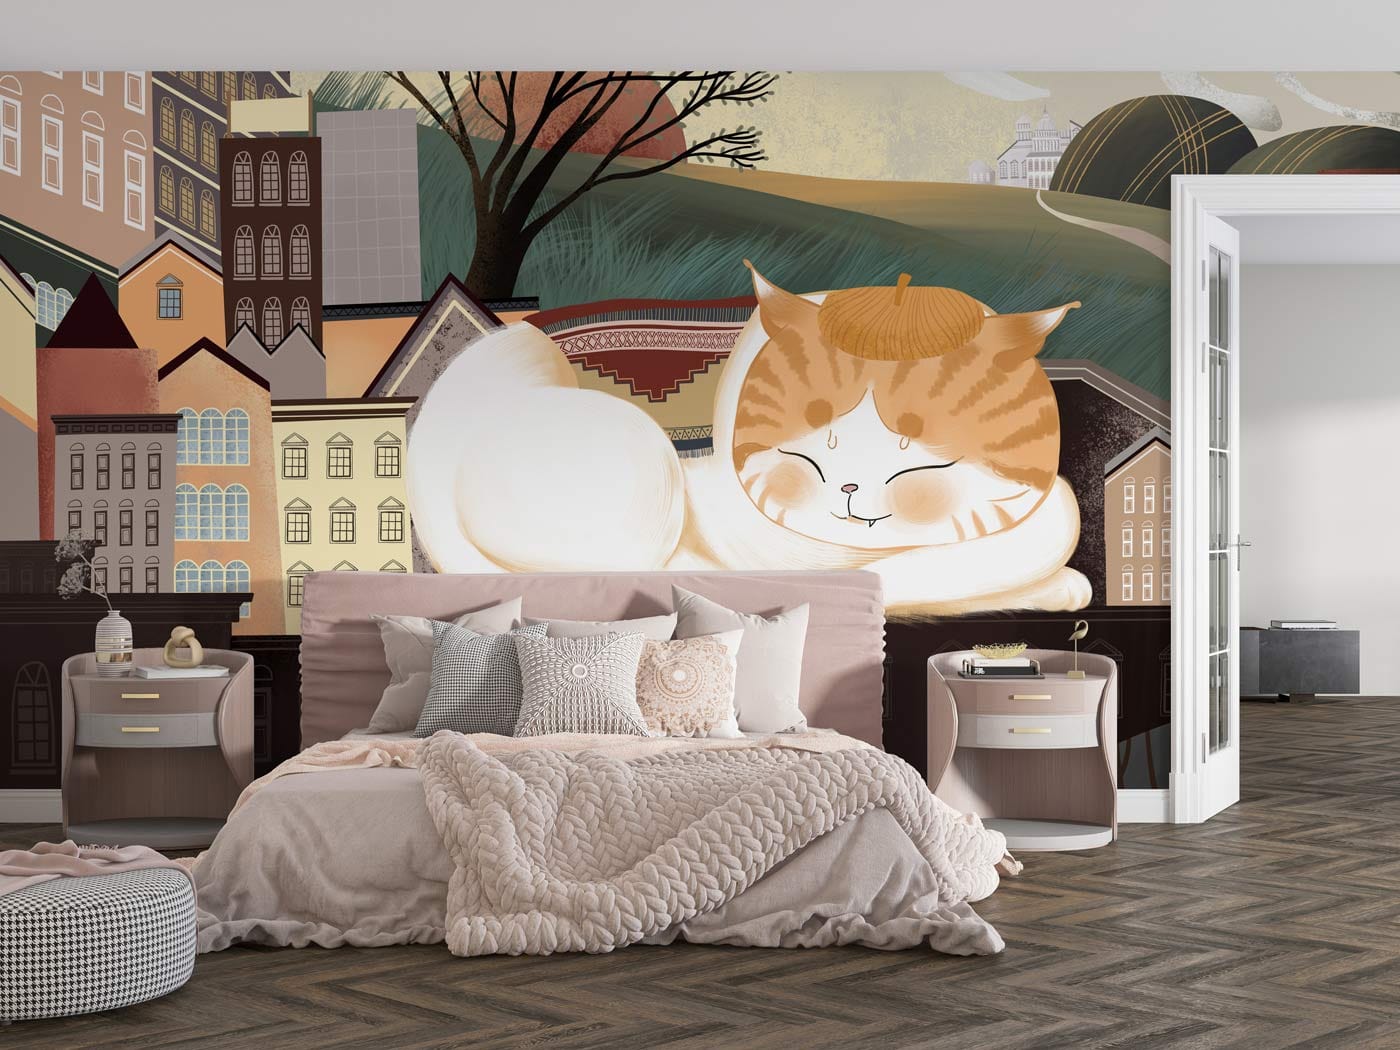 Decorate your bedroom with this adorable sleeping cat wallpaper mural!